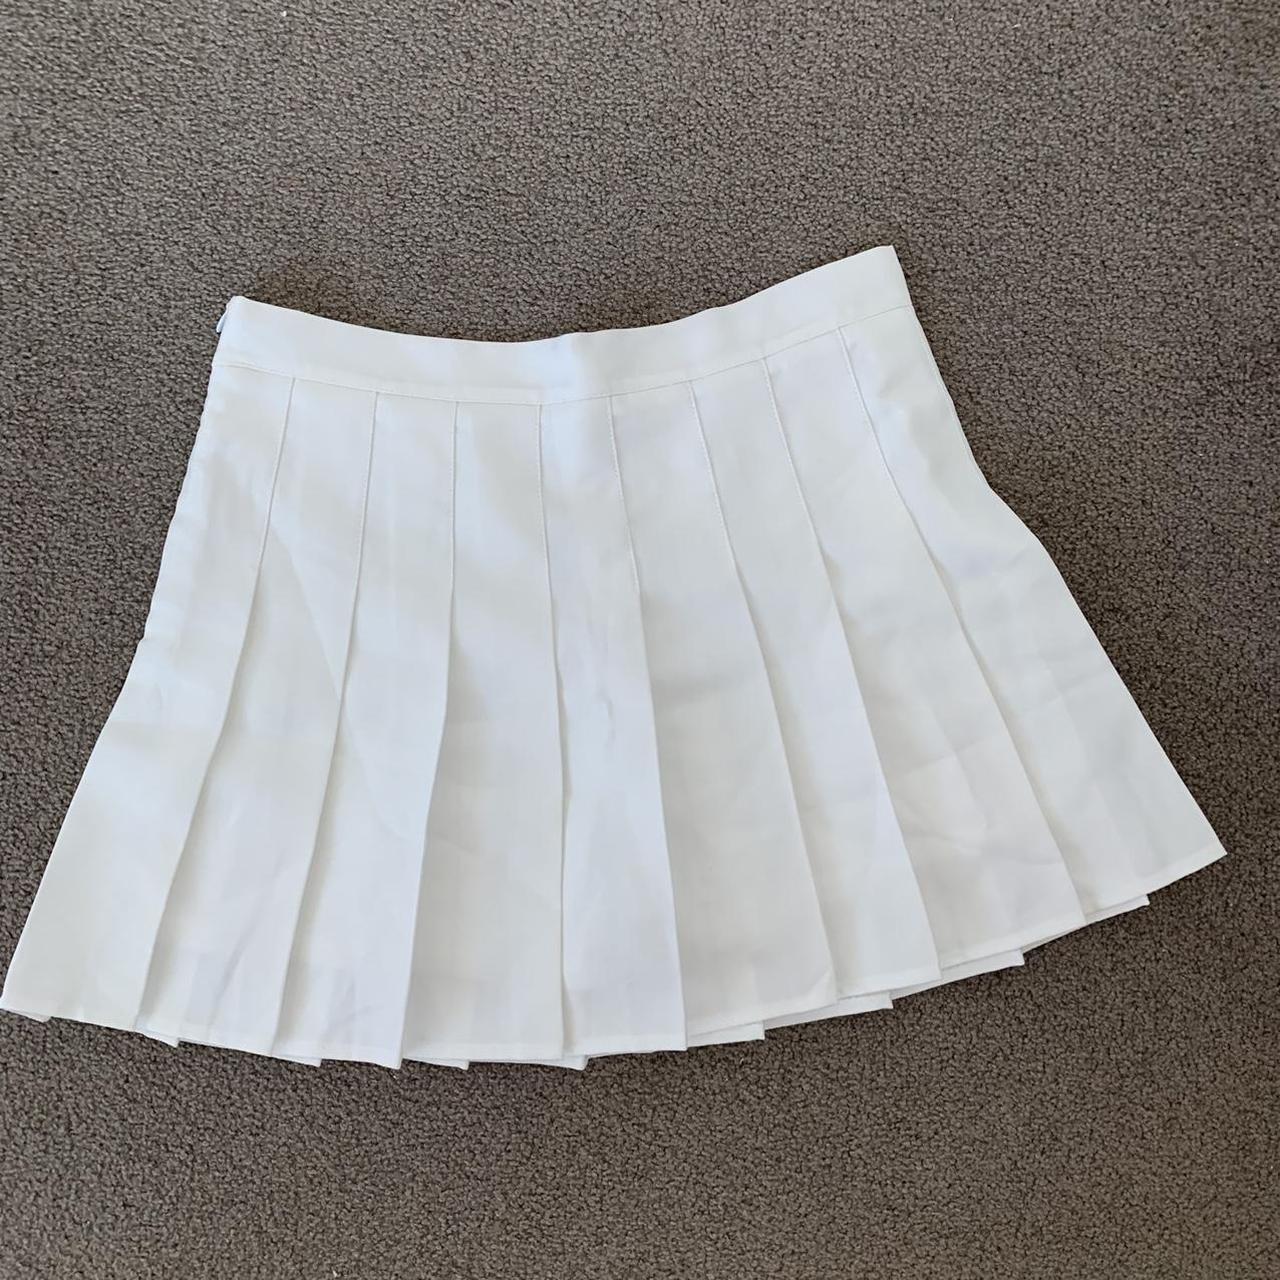 Pleated white skirt Skort - comes with pants under... - Depop